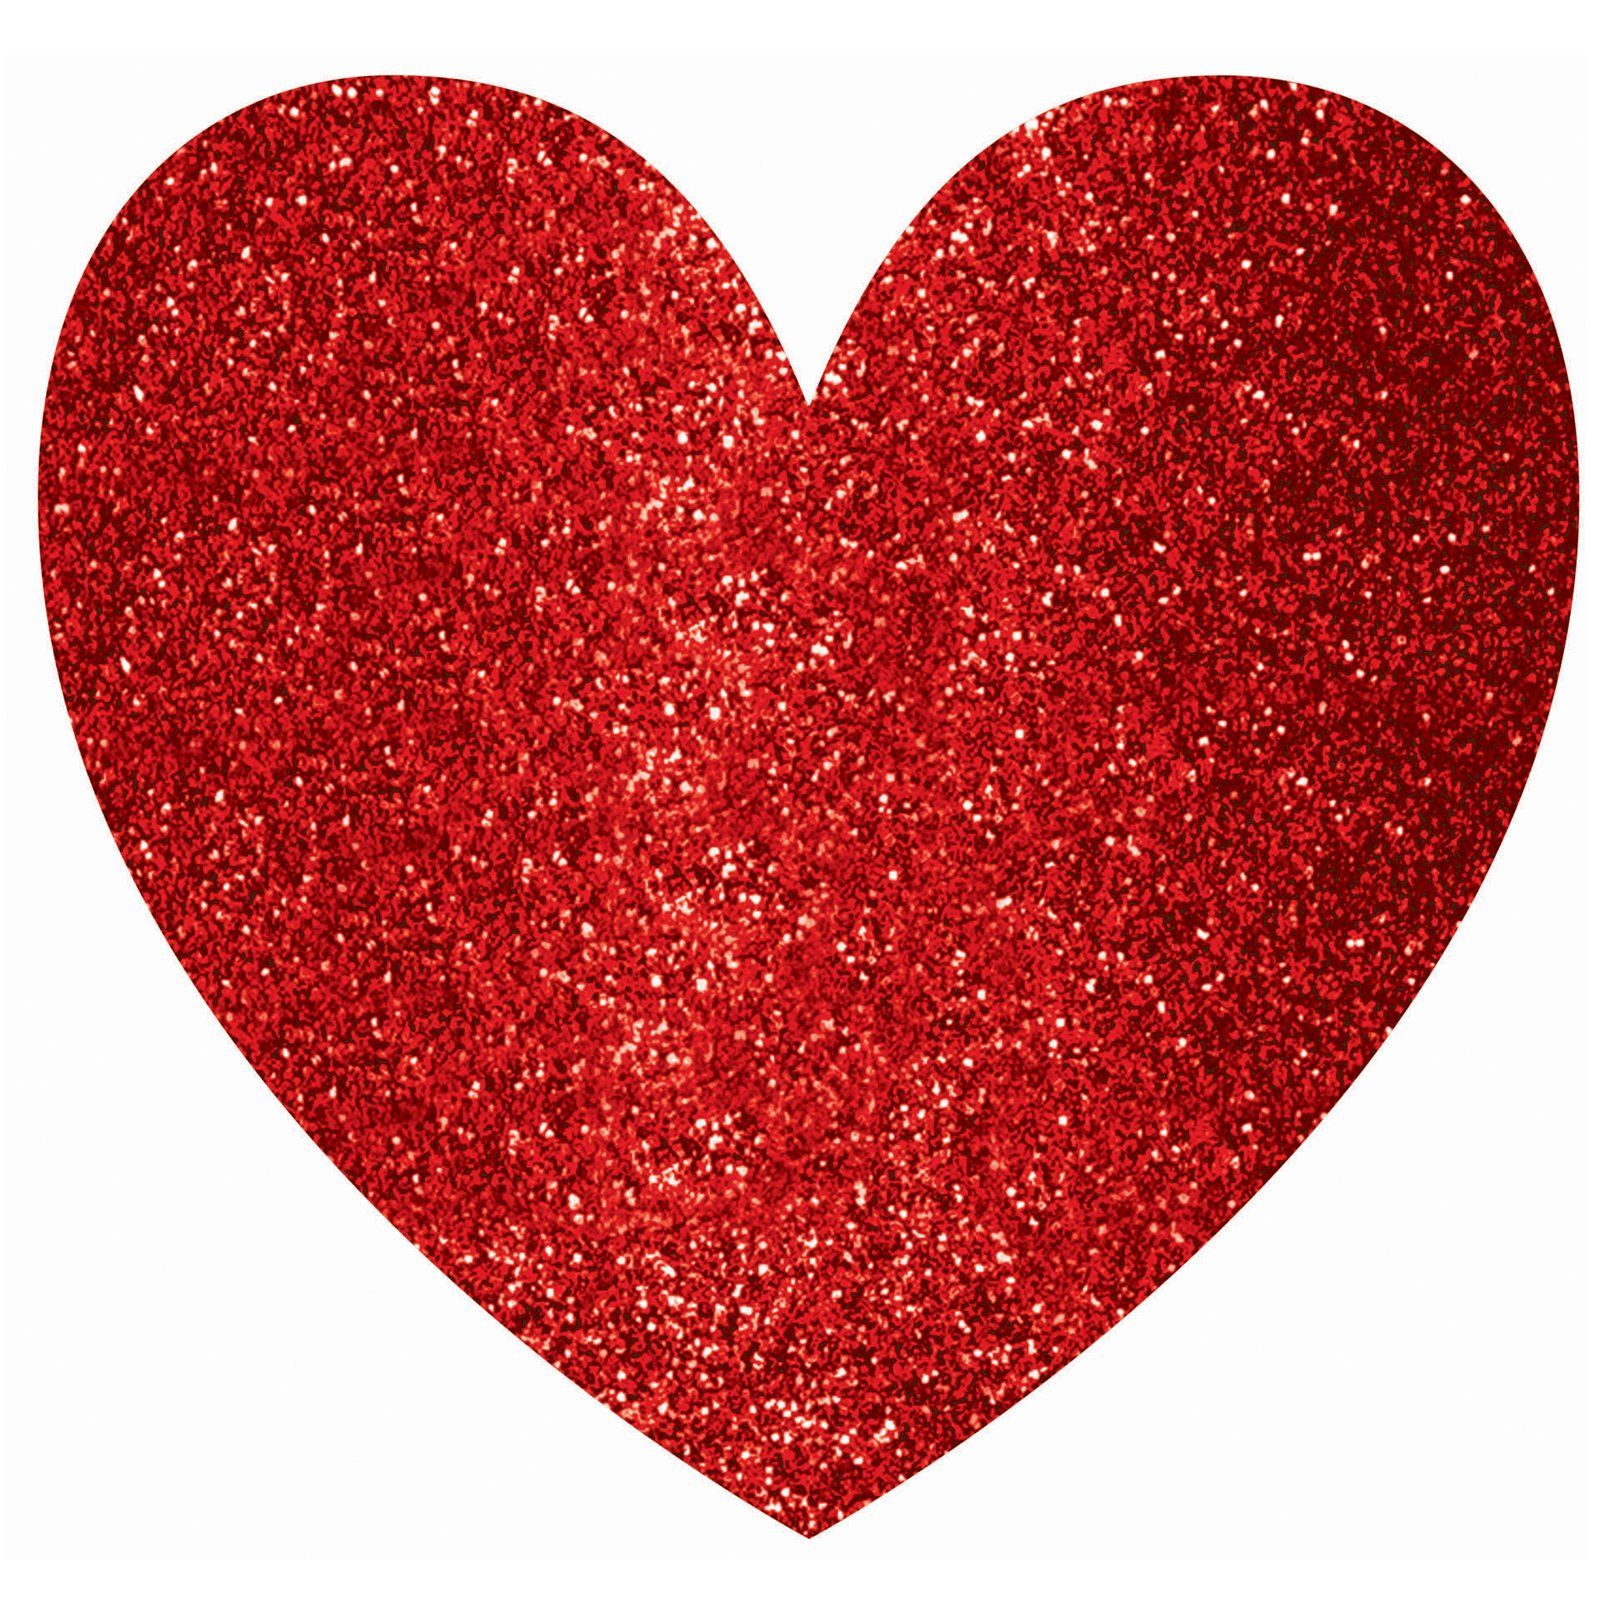 Valentine S Day Glitter Heart Value Pack 12 Count Description Decorate With Red Glitter Hearts All Over Your H Glitter Hearts Heart Pictures Valentine Heart